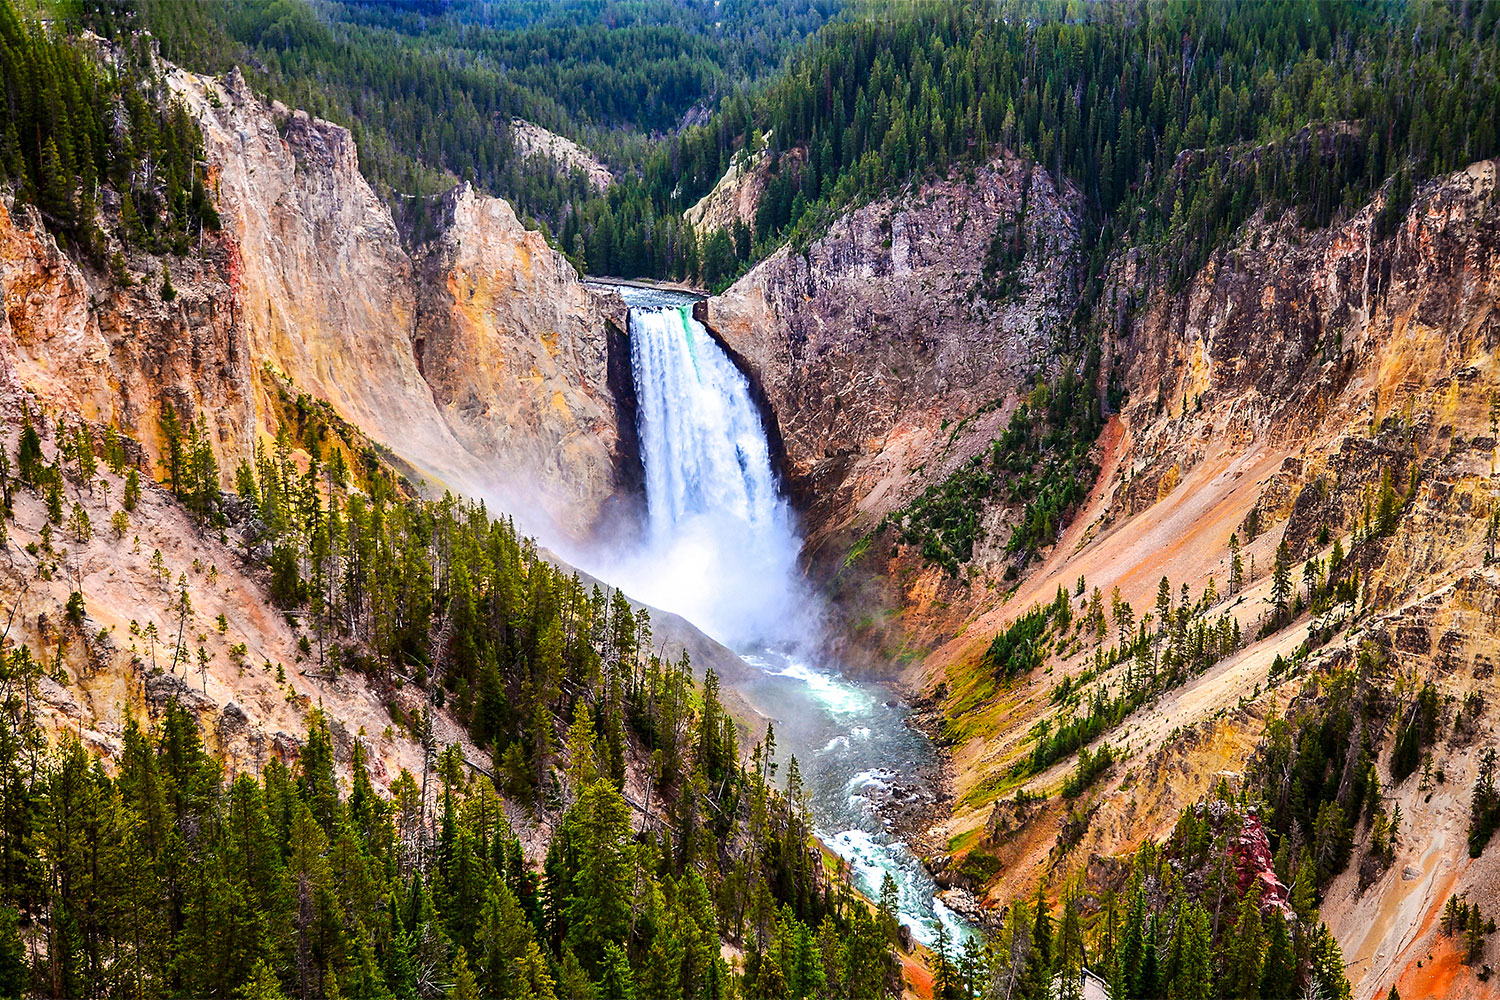 Pijlpunt lippen Geweldig The 21 Essentials You Need for a Trip to Yellowstone in 2022 - The Manual